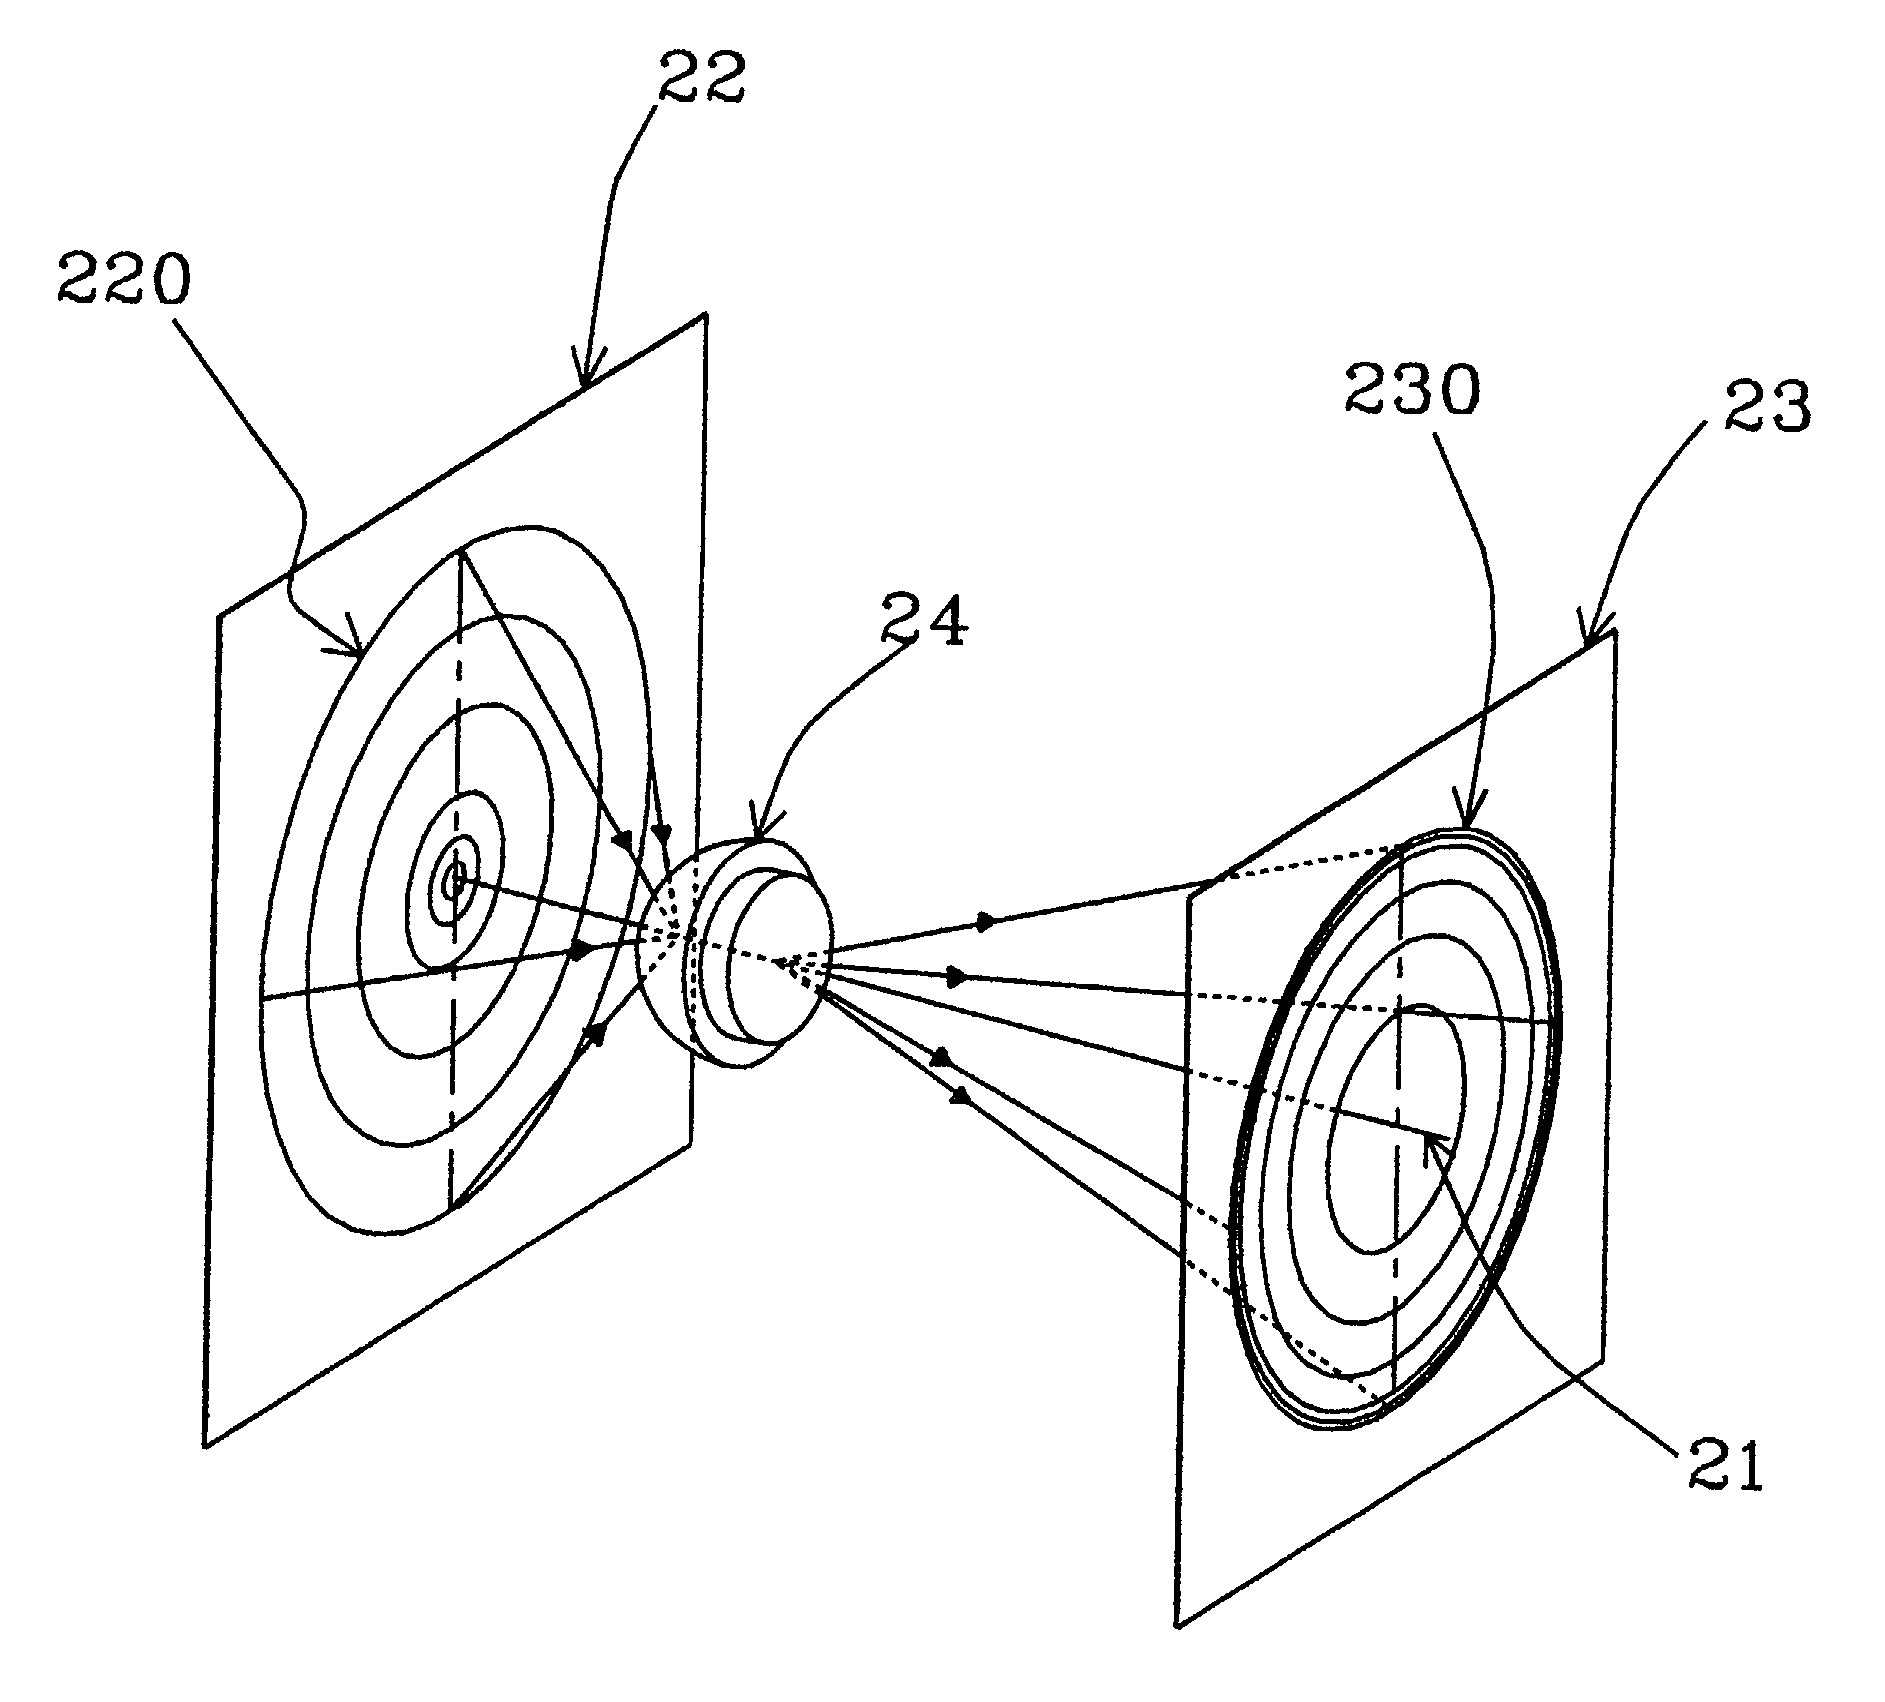 Method for exploring viewpoint and focal length of camera